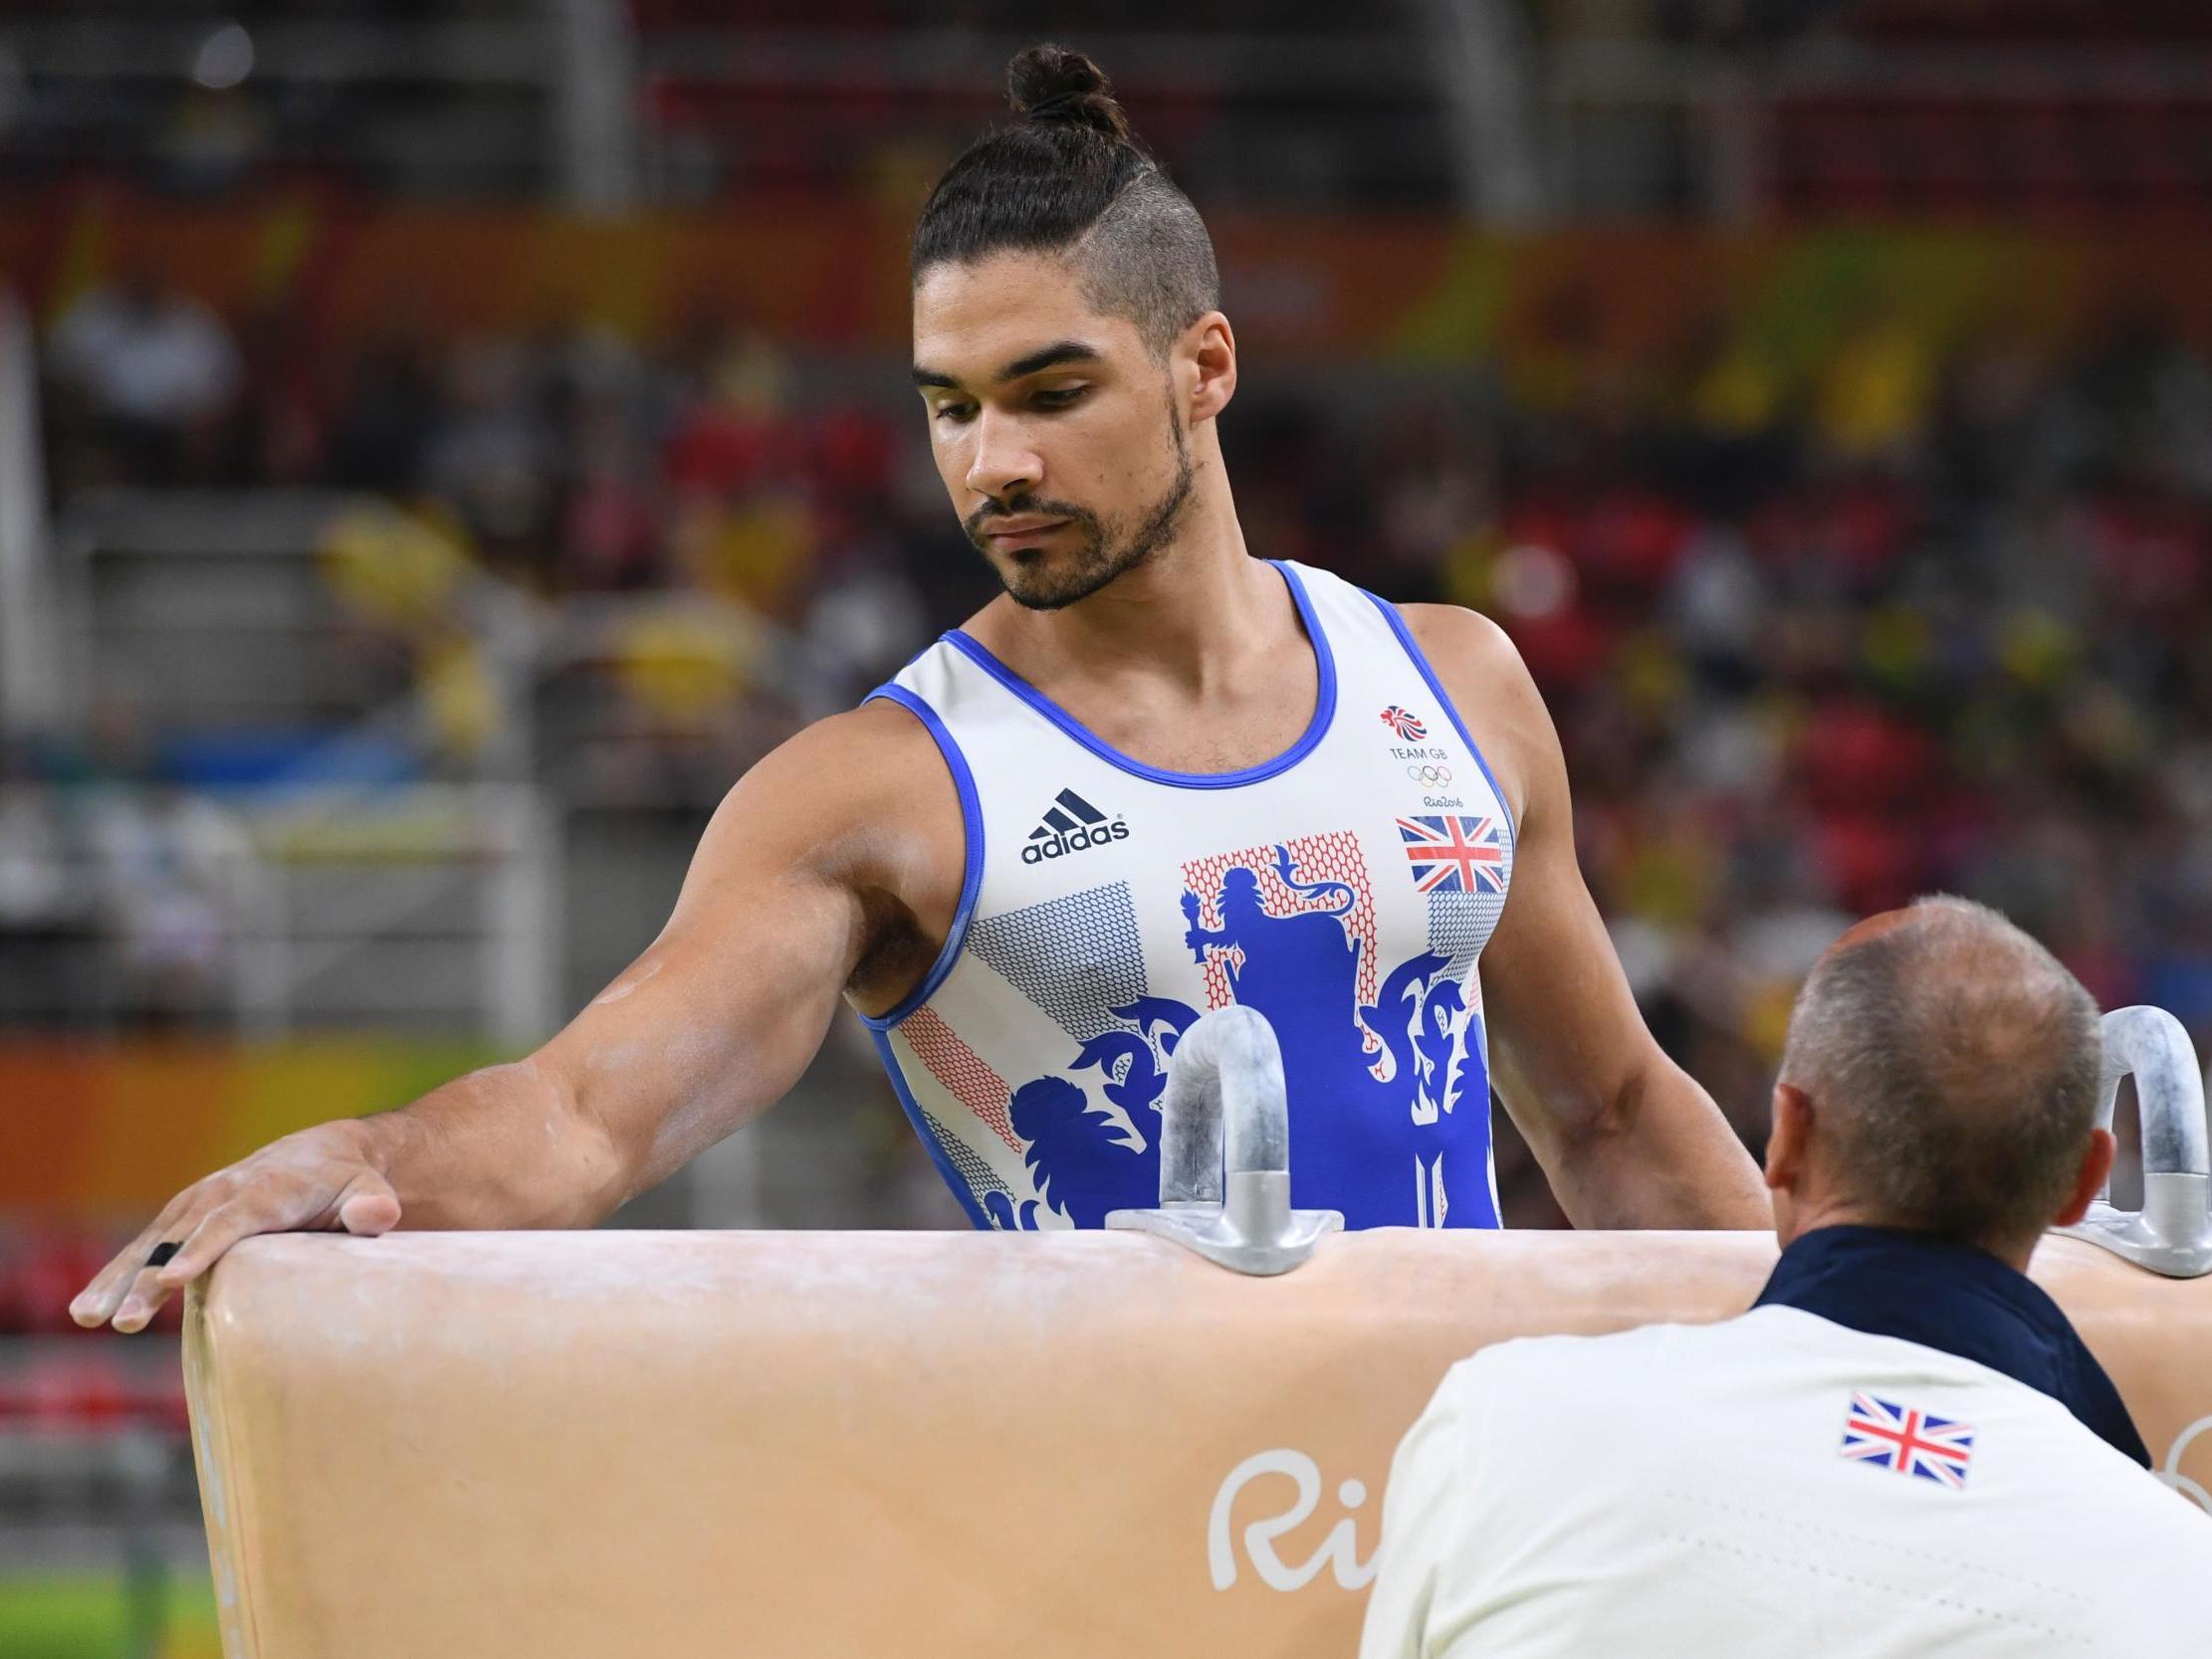 Louis Smith in action at the 2016 Olympics in Rio